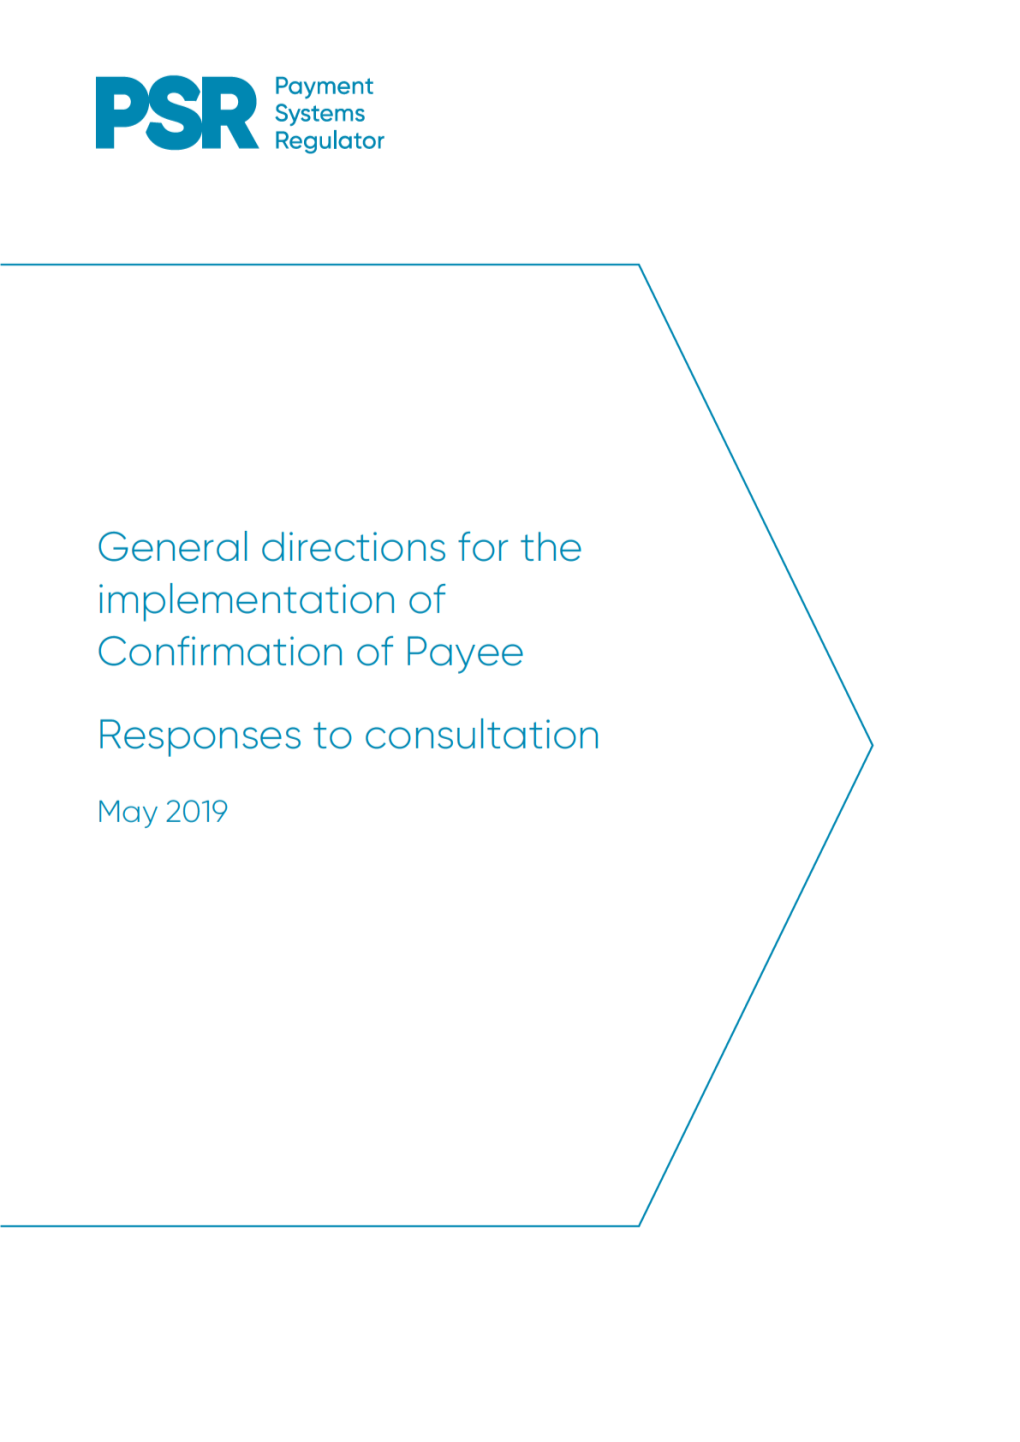 Confirmation of Payee Responses to Consultation